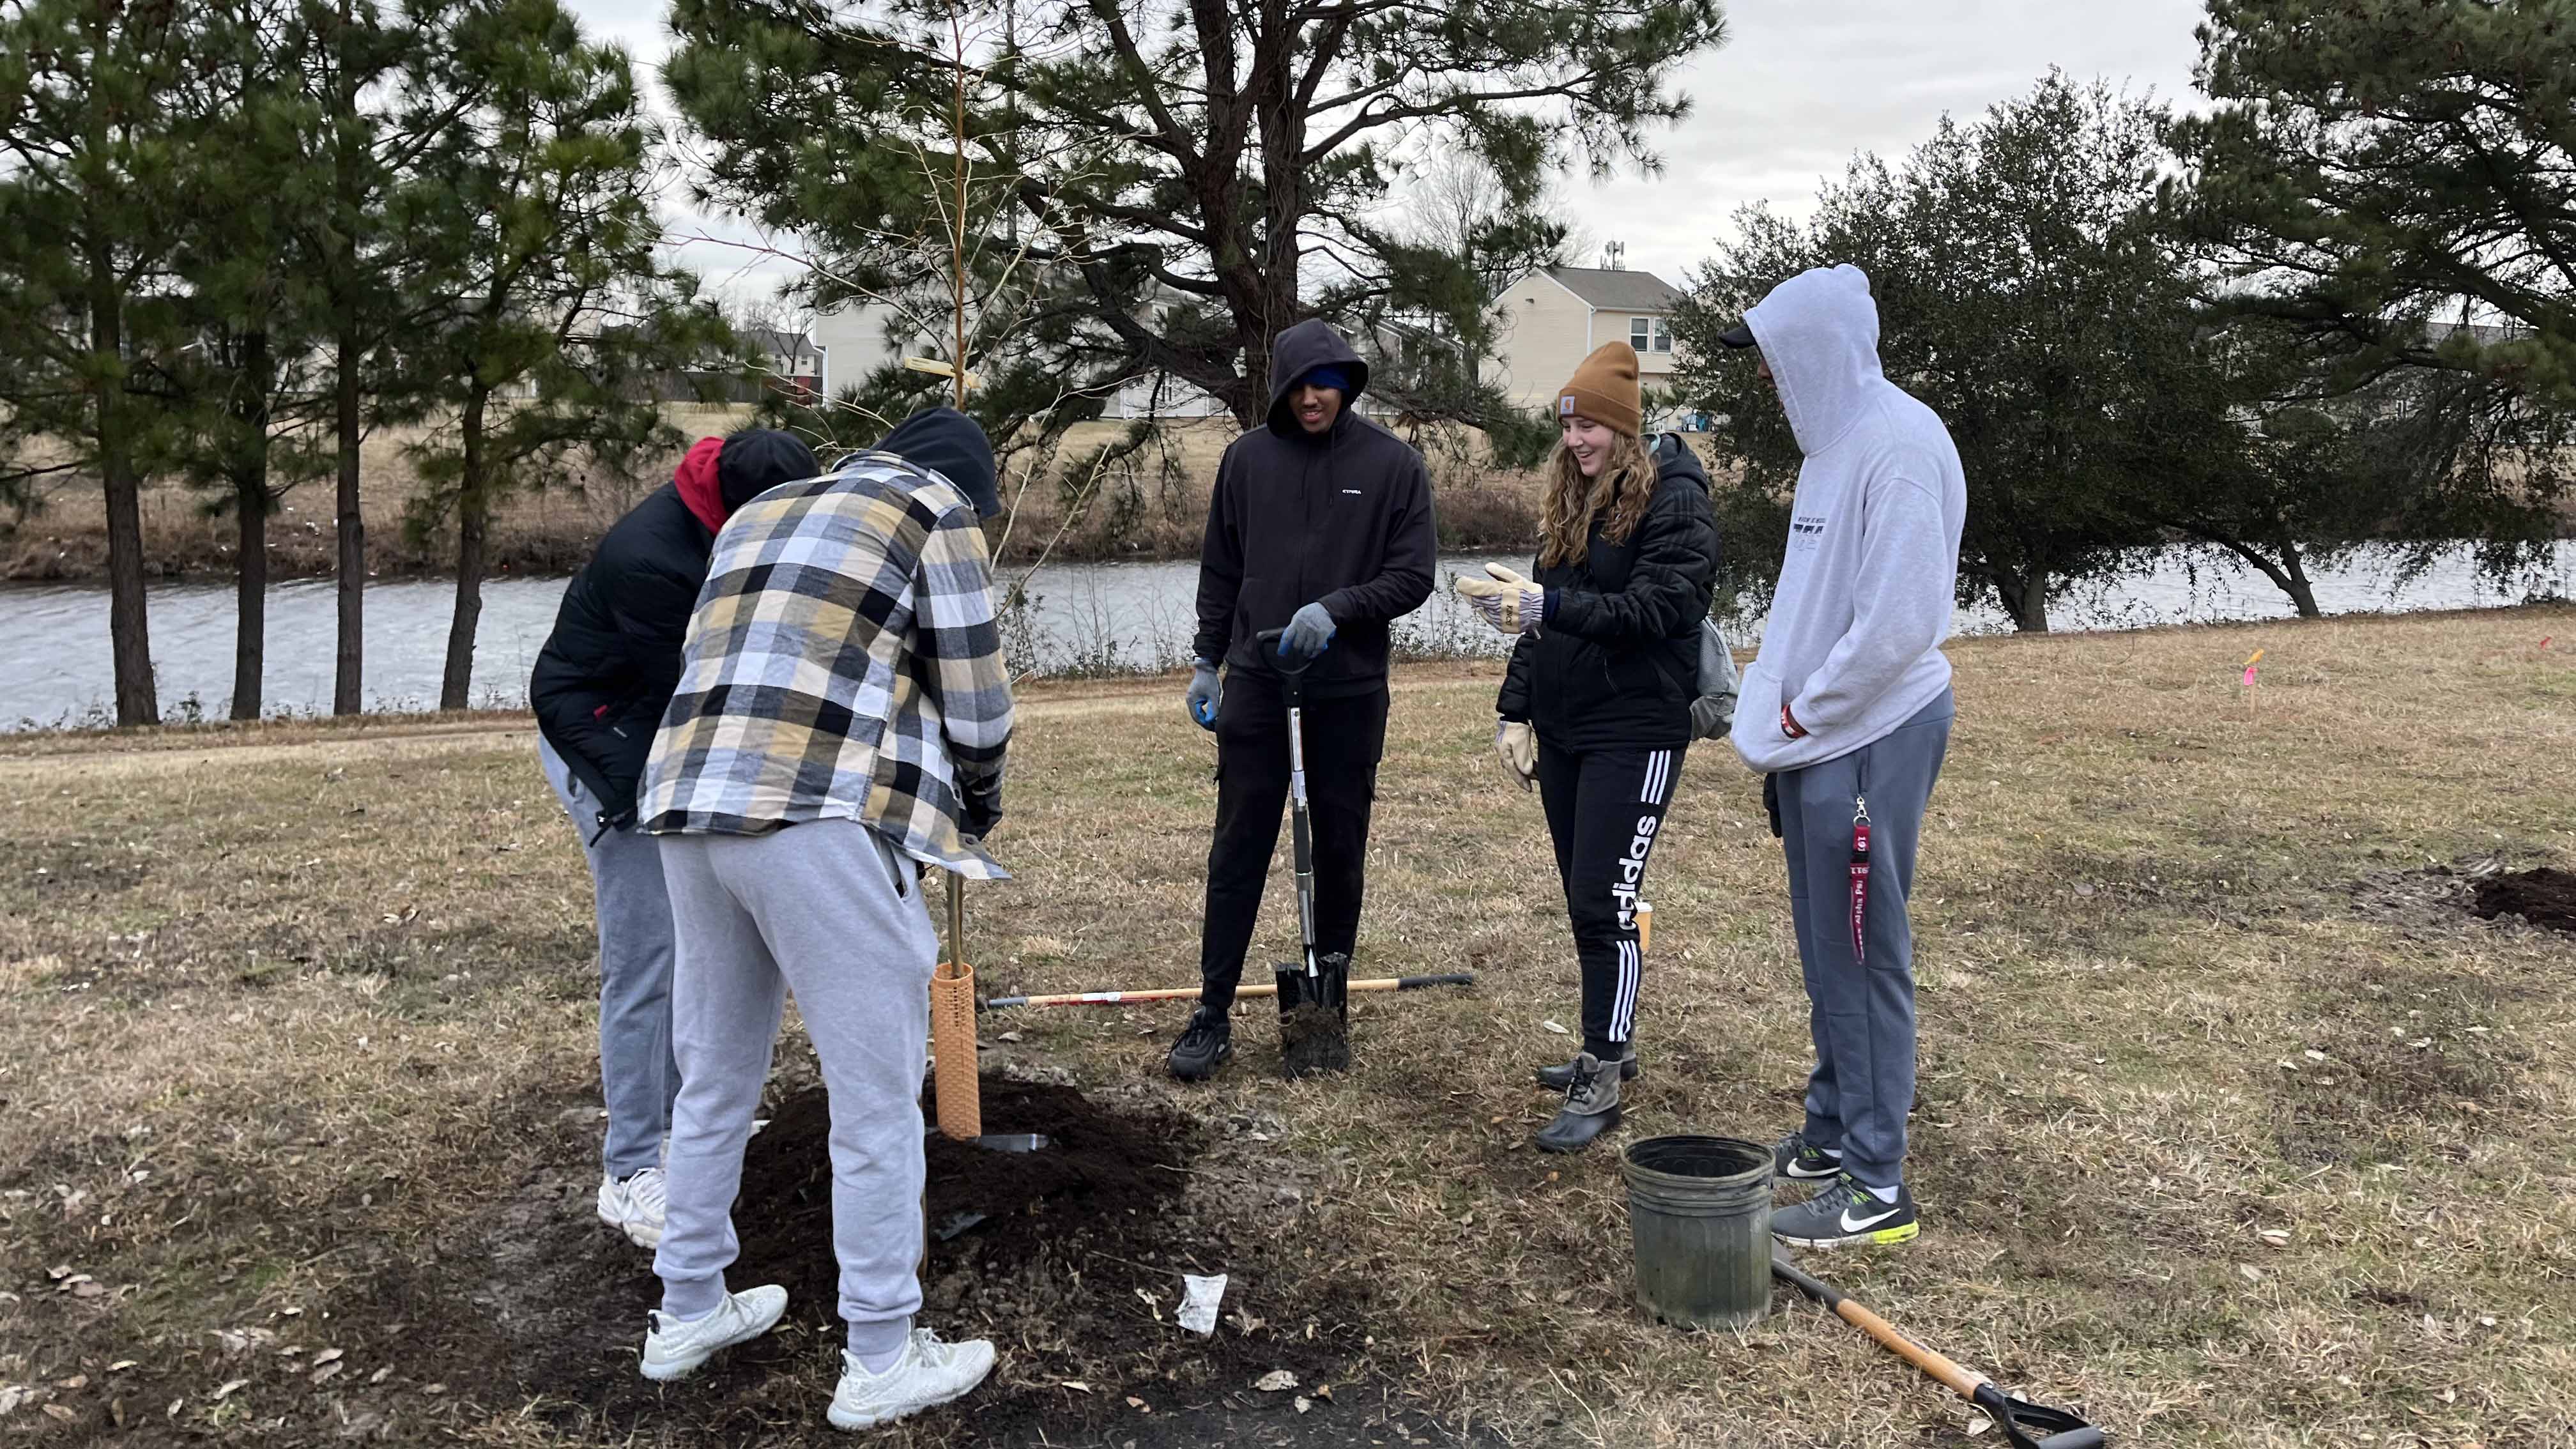 Photo courtesy of Elizabeth Malcolm. Volunteers, including Virginia Wesleyan University students, plant trees at a spot in the Green Run neighborhood identified as one of the most vulnerable in Virginia Beach to extreme heat.